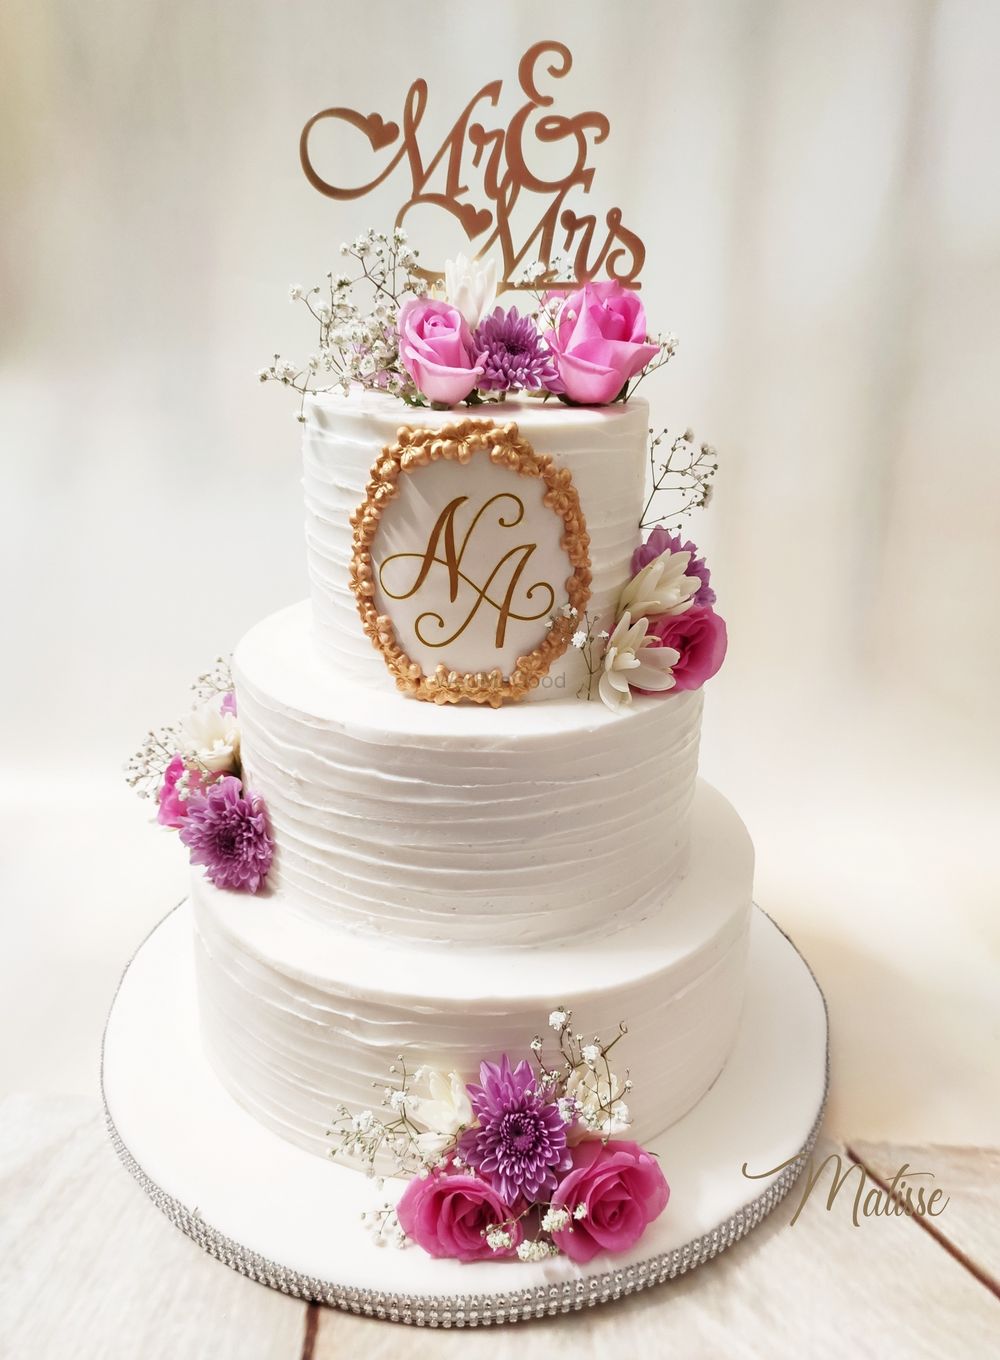 Photo From Wedding Cakes - By Matisse Cake Design Studio